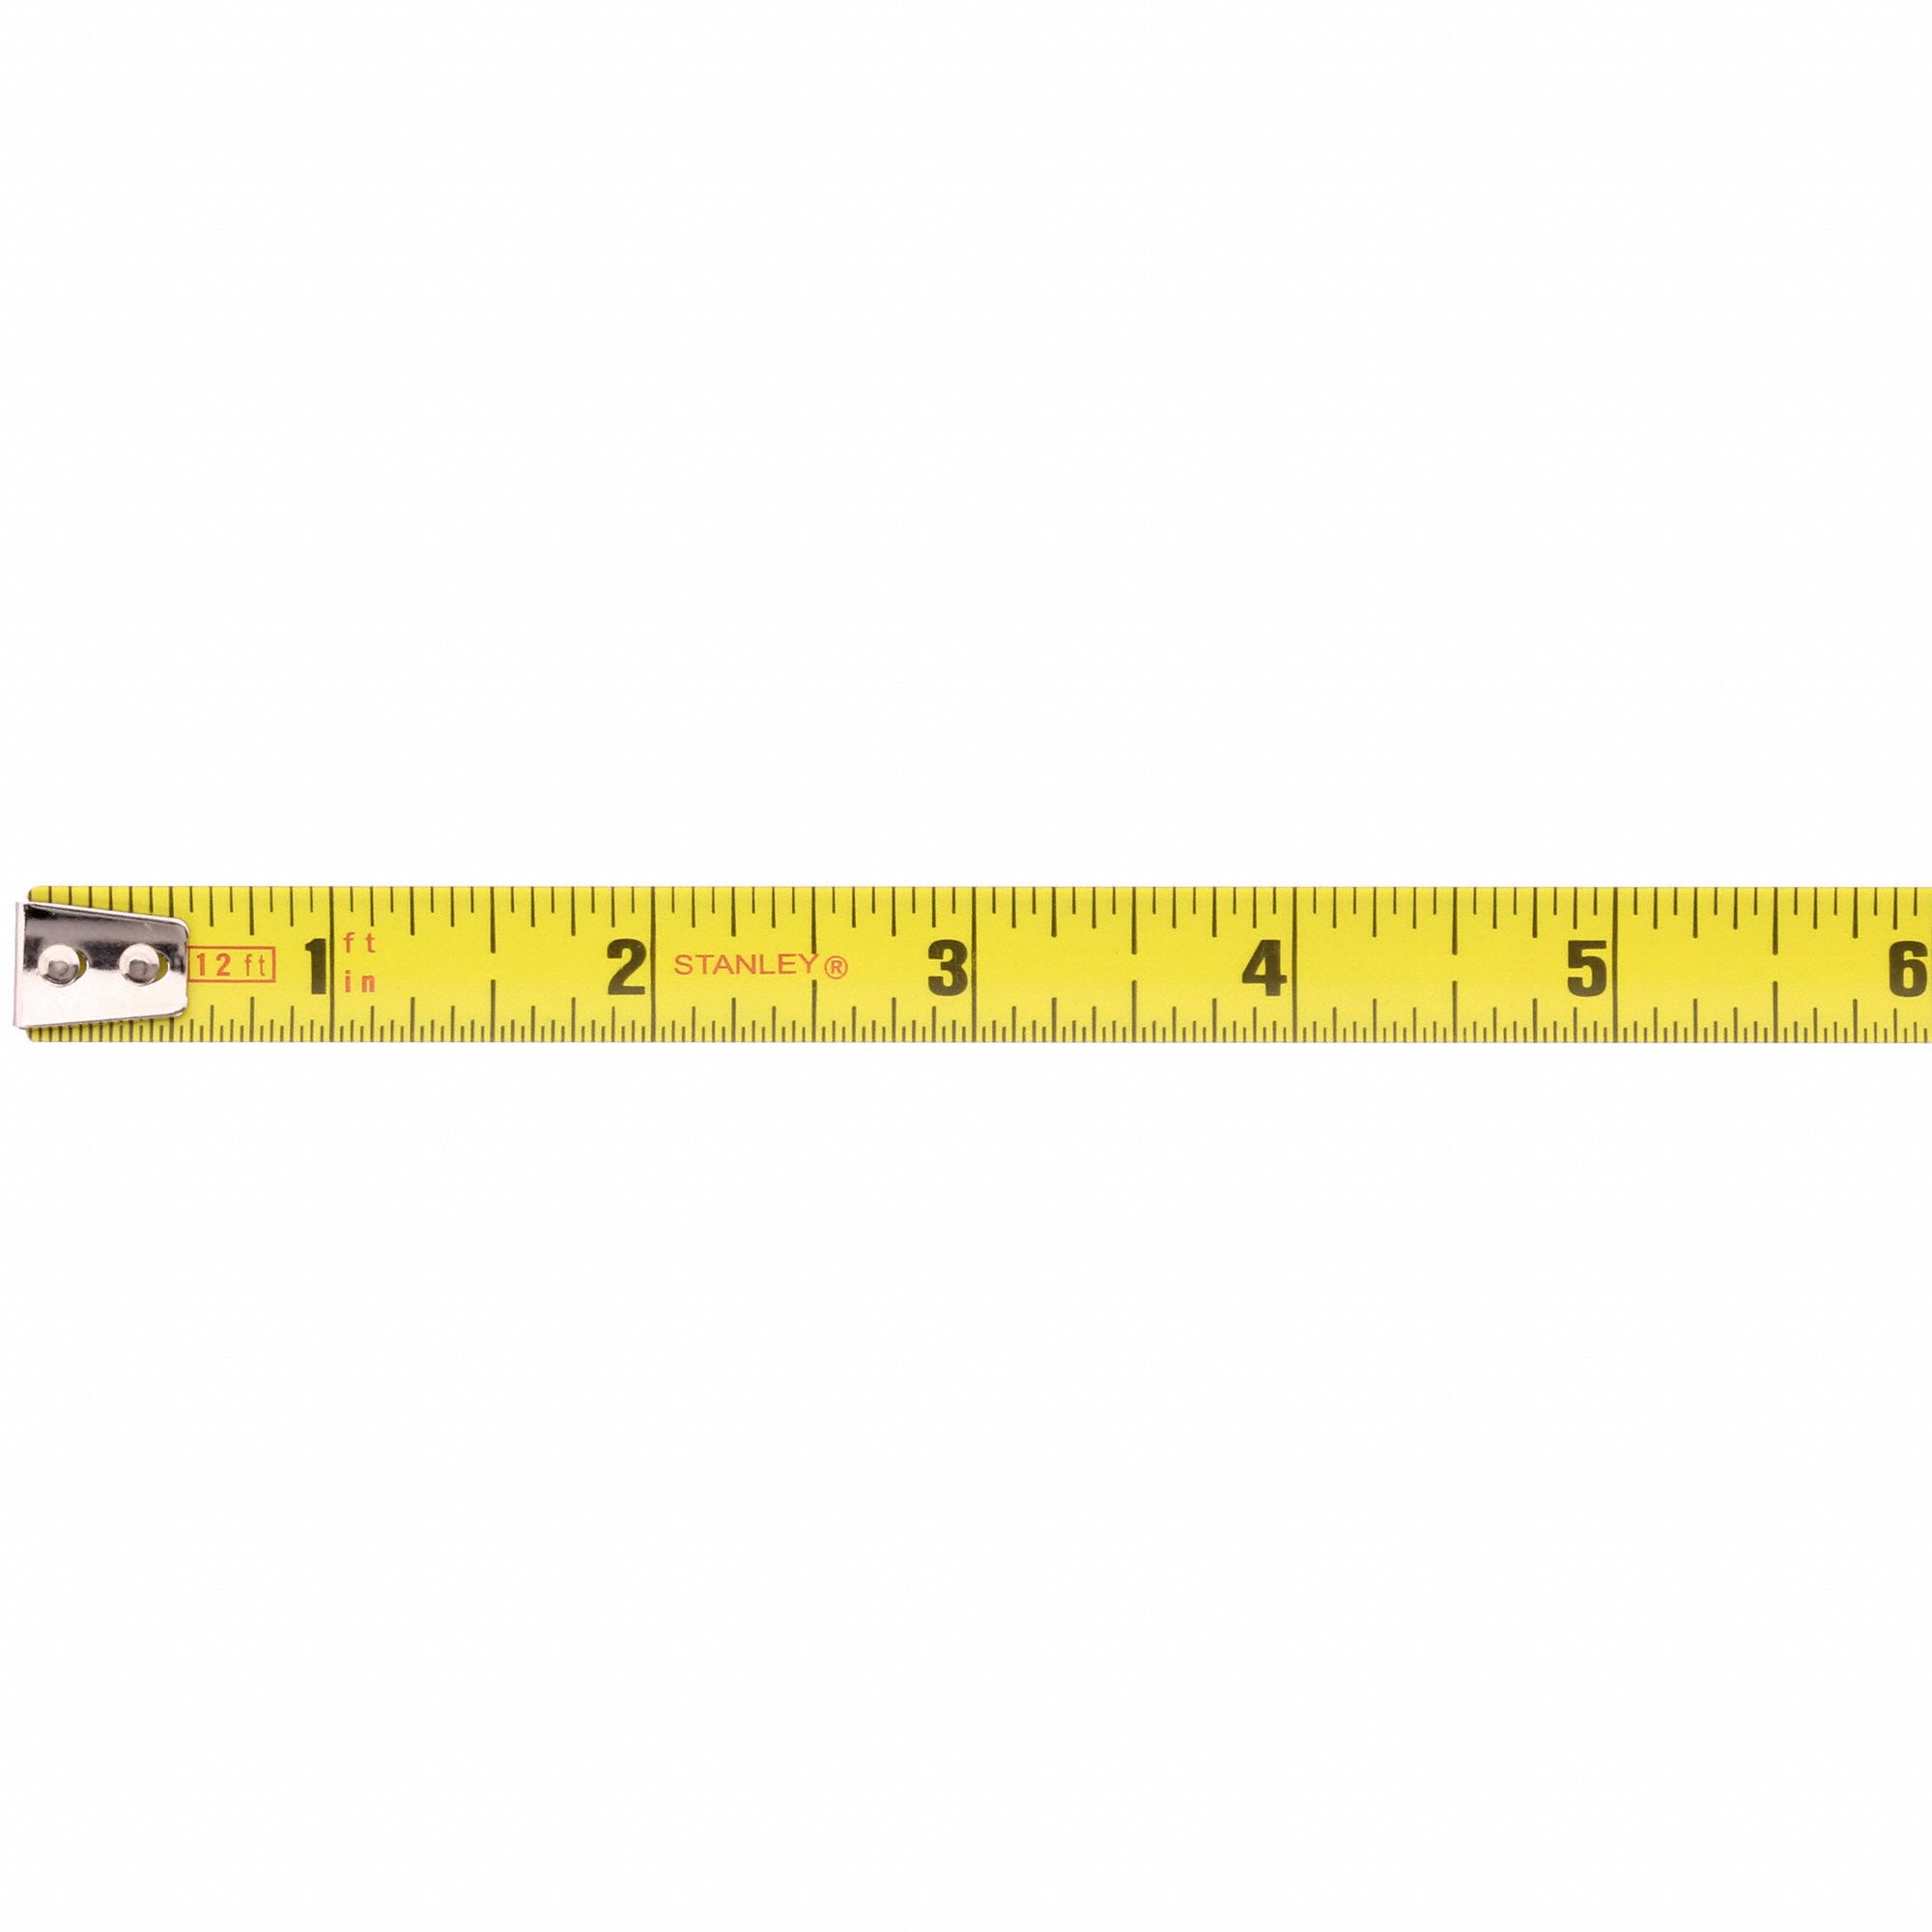 Detail Tape Measure Picture Nomer 27